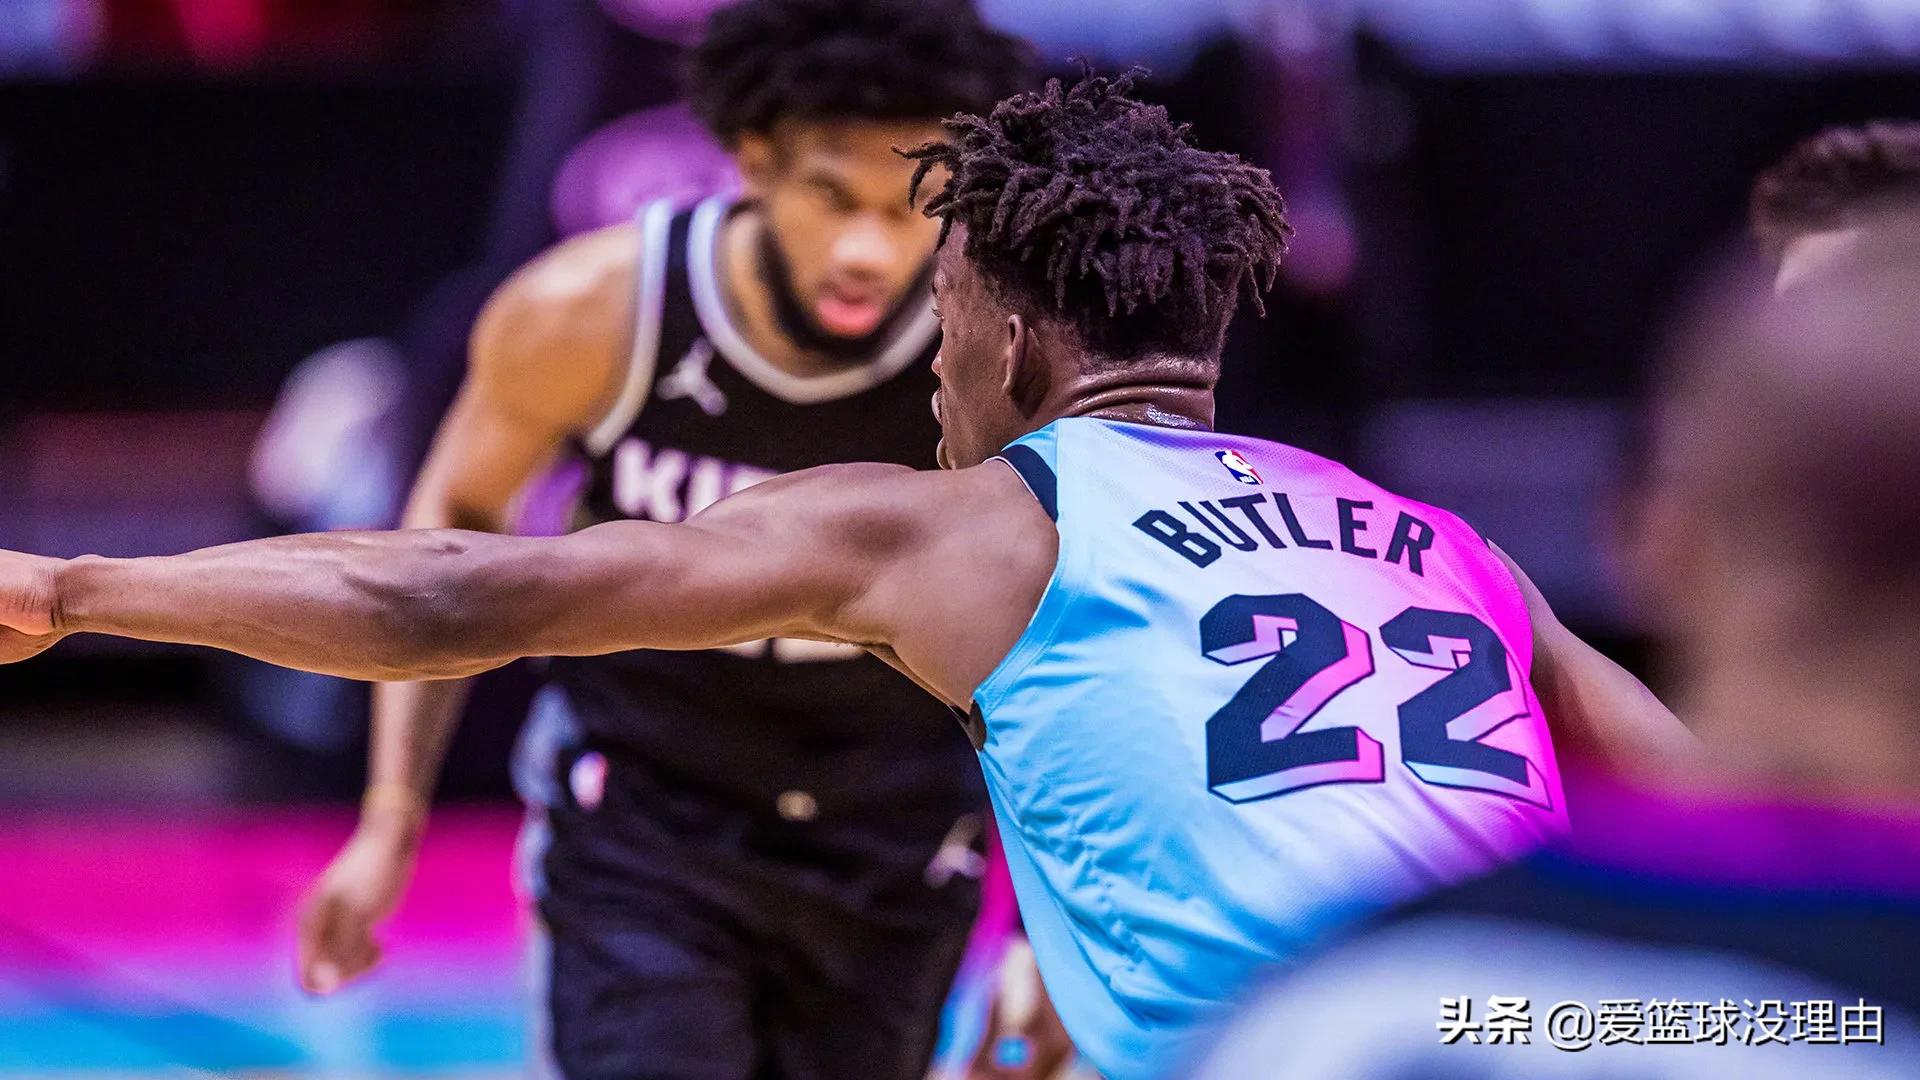 NBA the first a tough guy! Butler reappears first regnant match, aid team to end 5 be defeated repeatedly